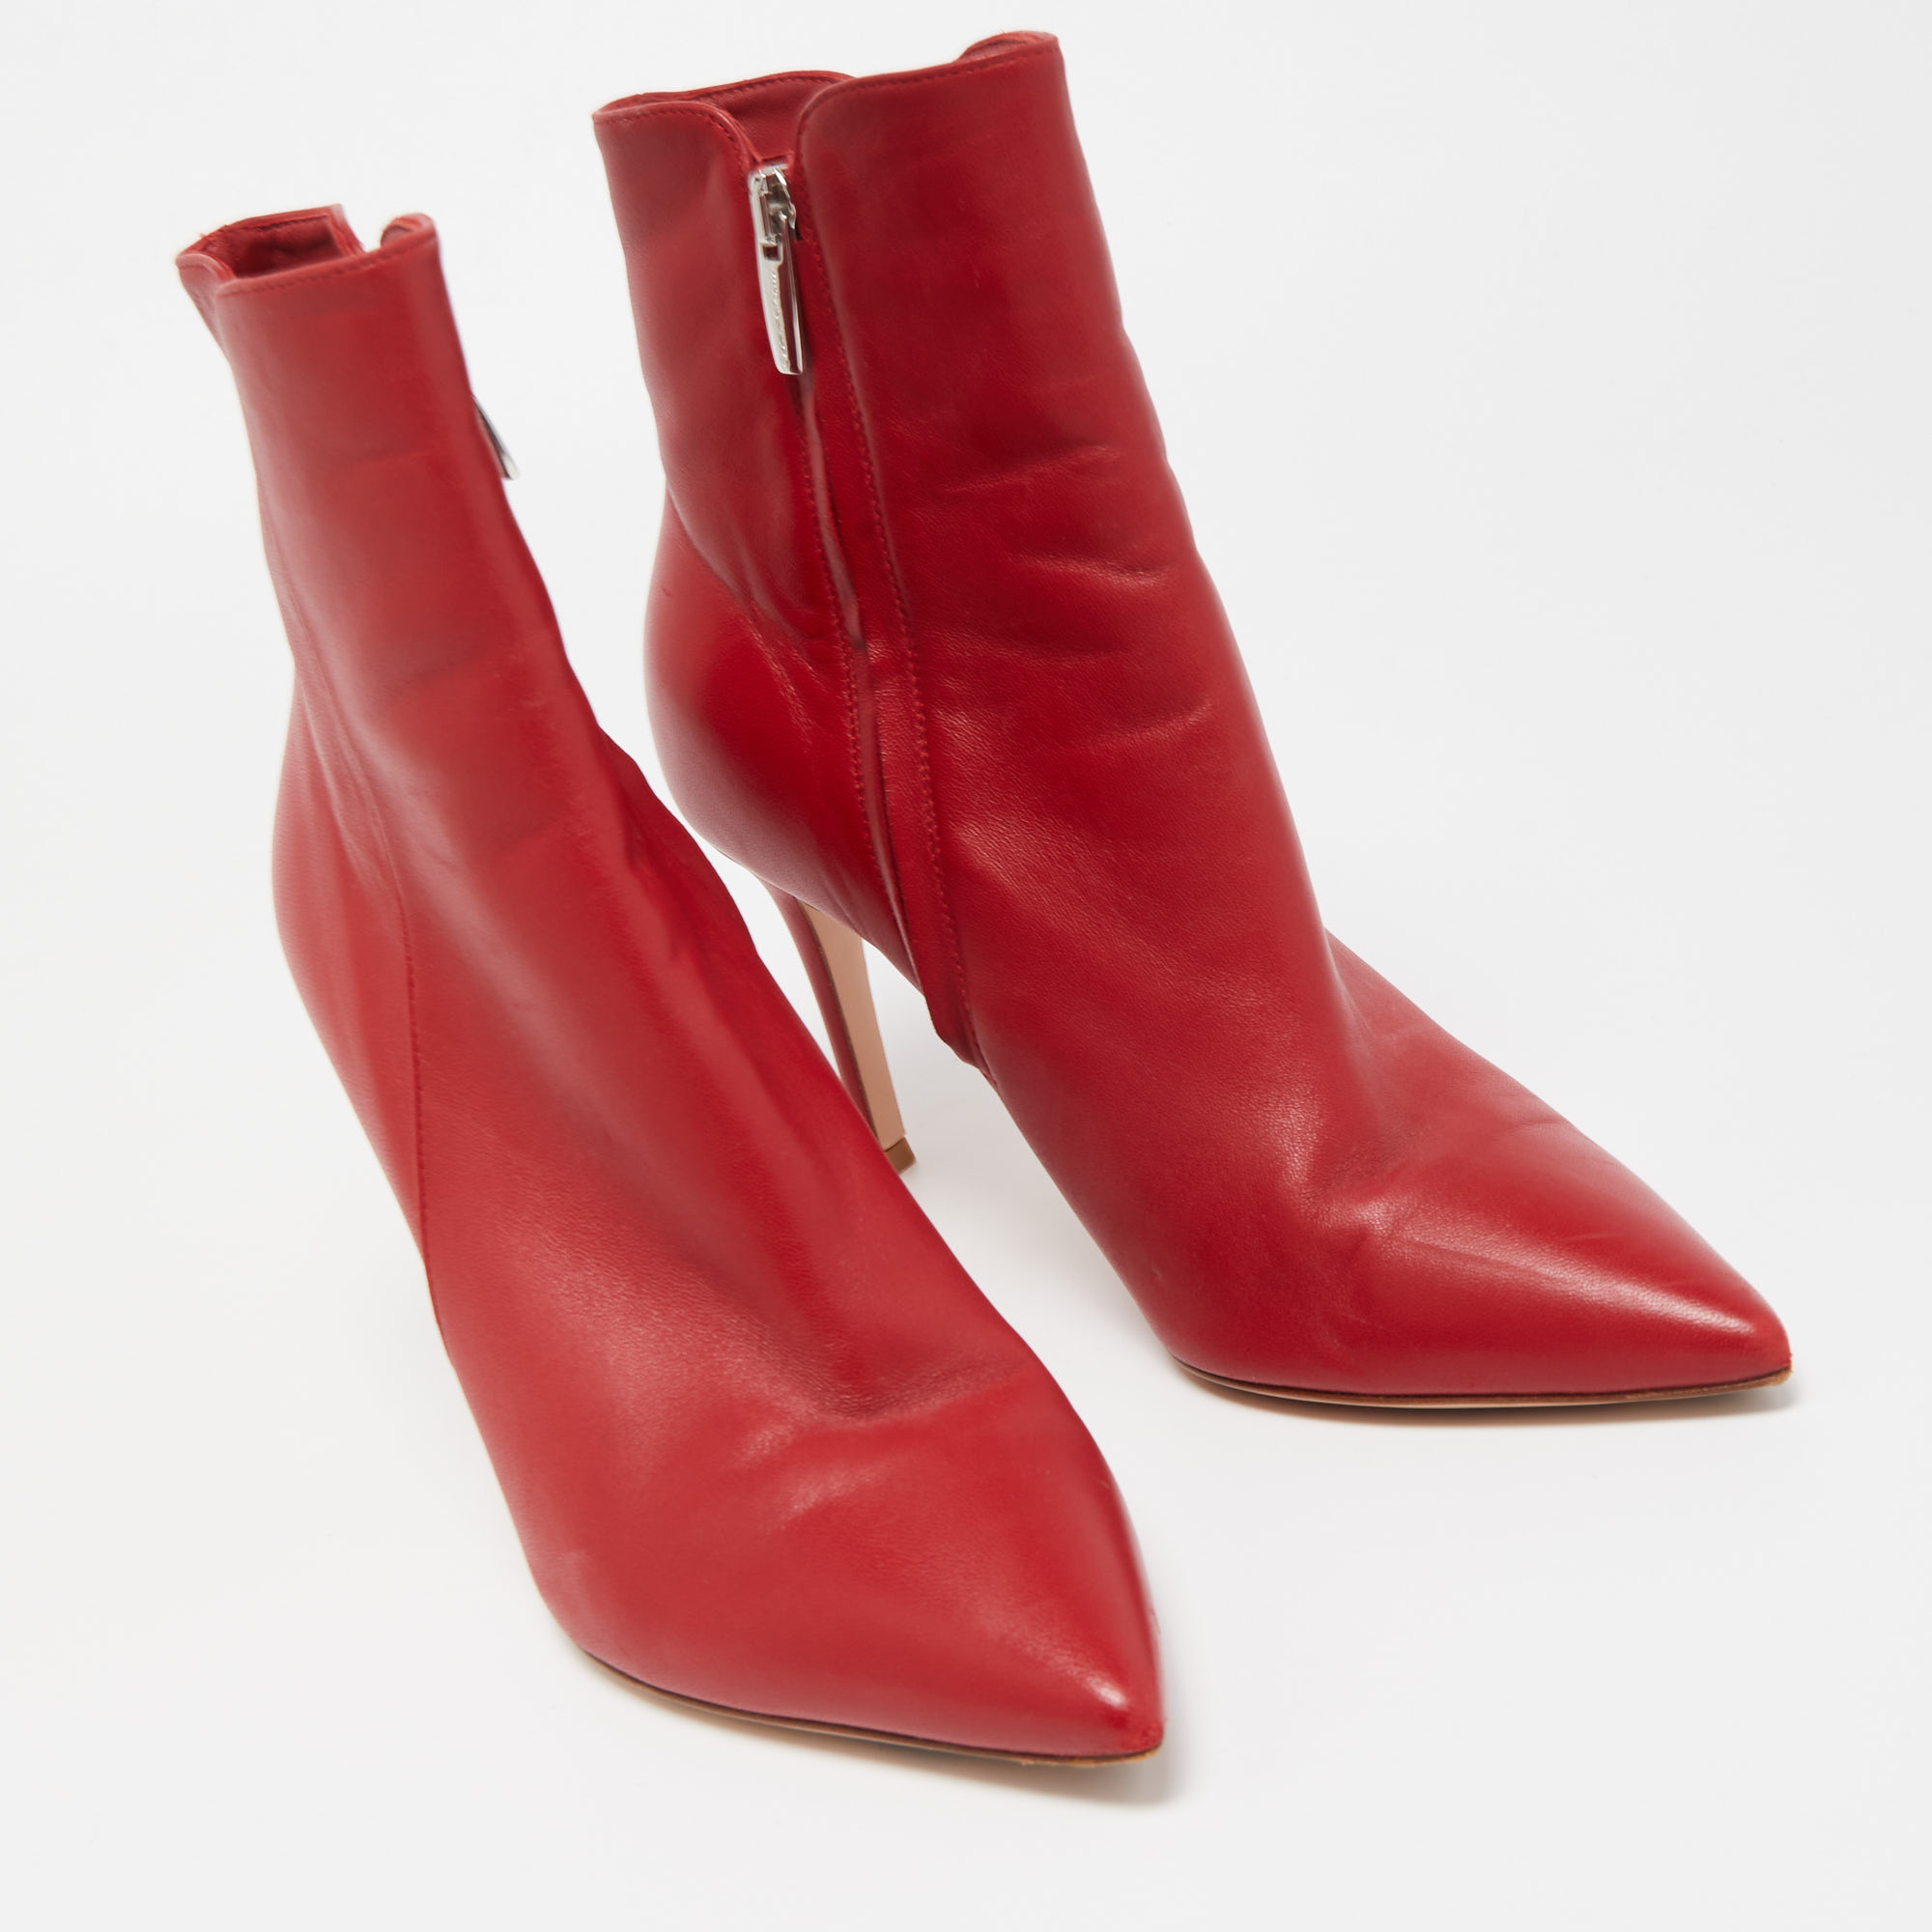 Gianvito Rossi Red Leather Pointed Toe Ankle Length Boots Size 37.5